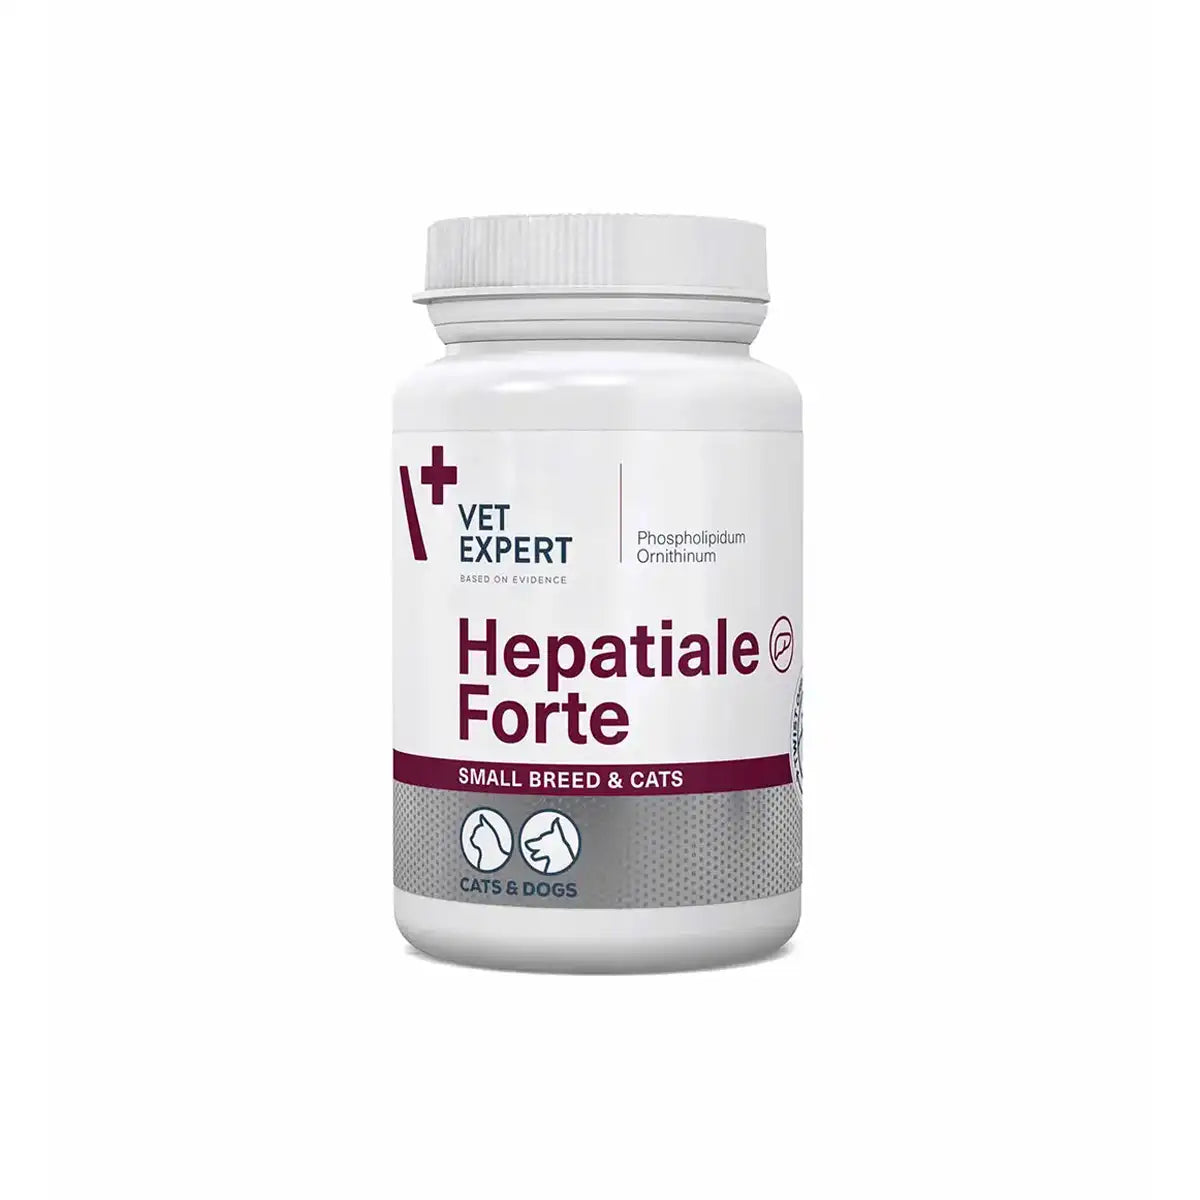 Vet Expert Hepatiale Forte (Liver Supplement For Small Breed Dogs) 40 Twist-Off Capsules